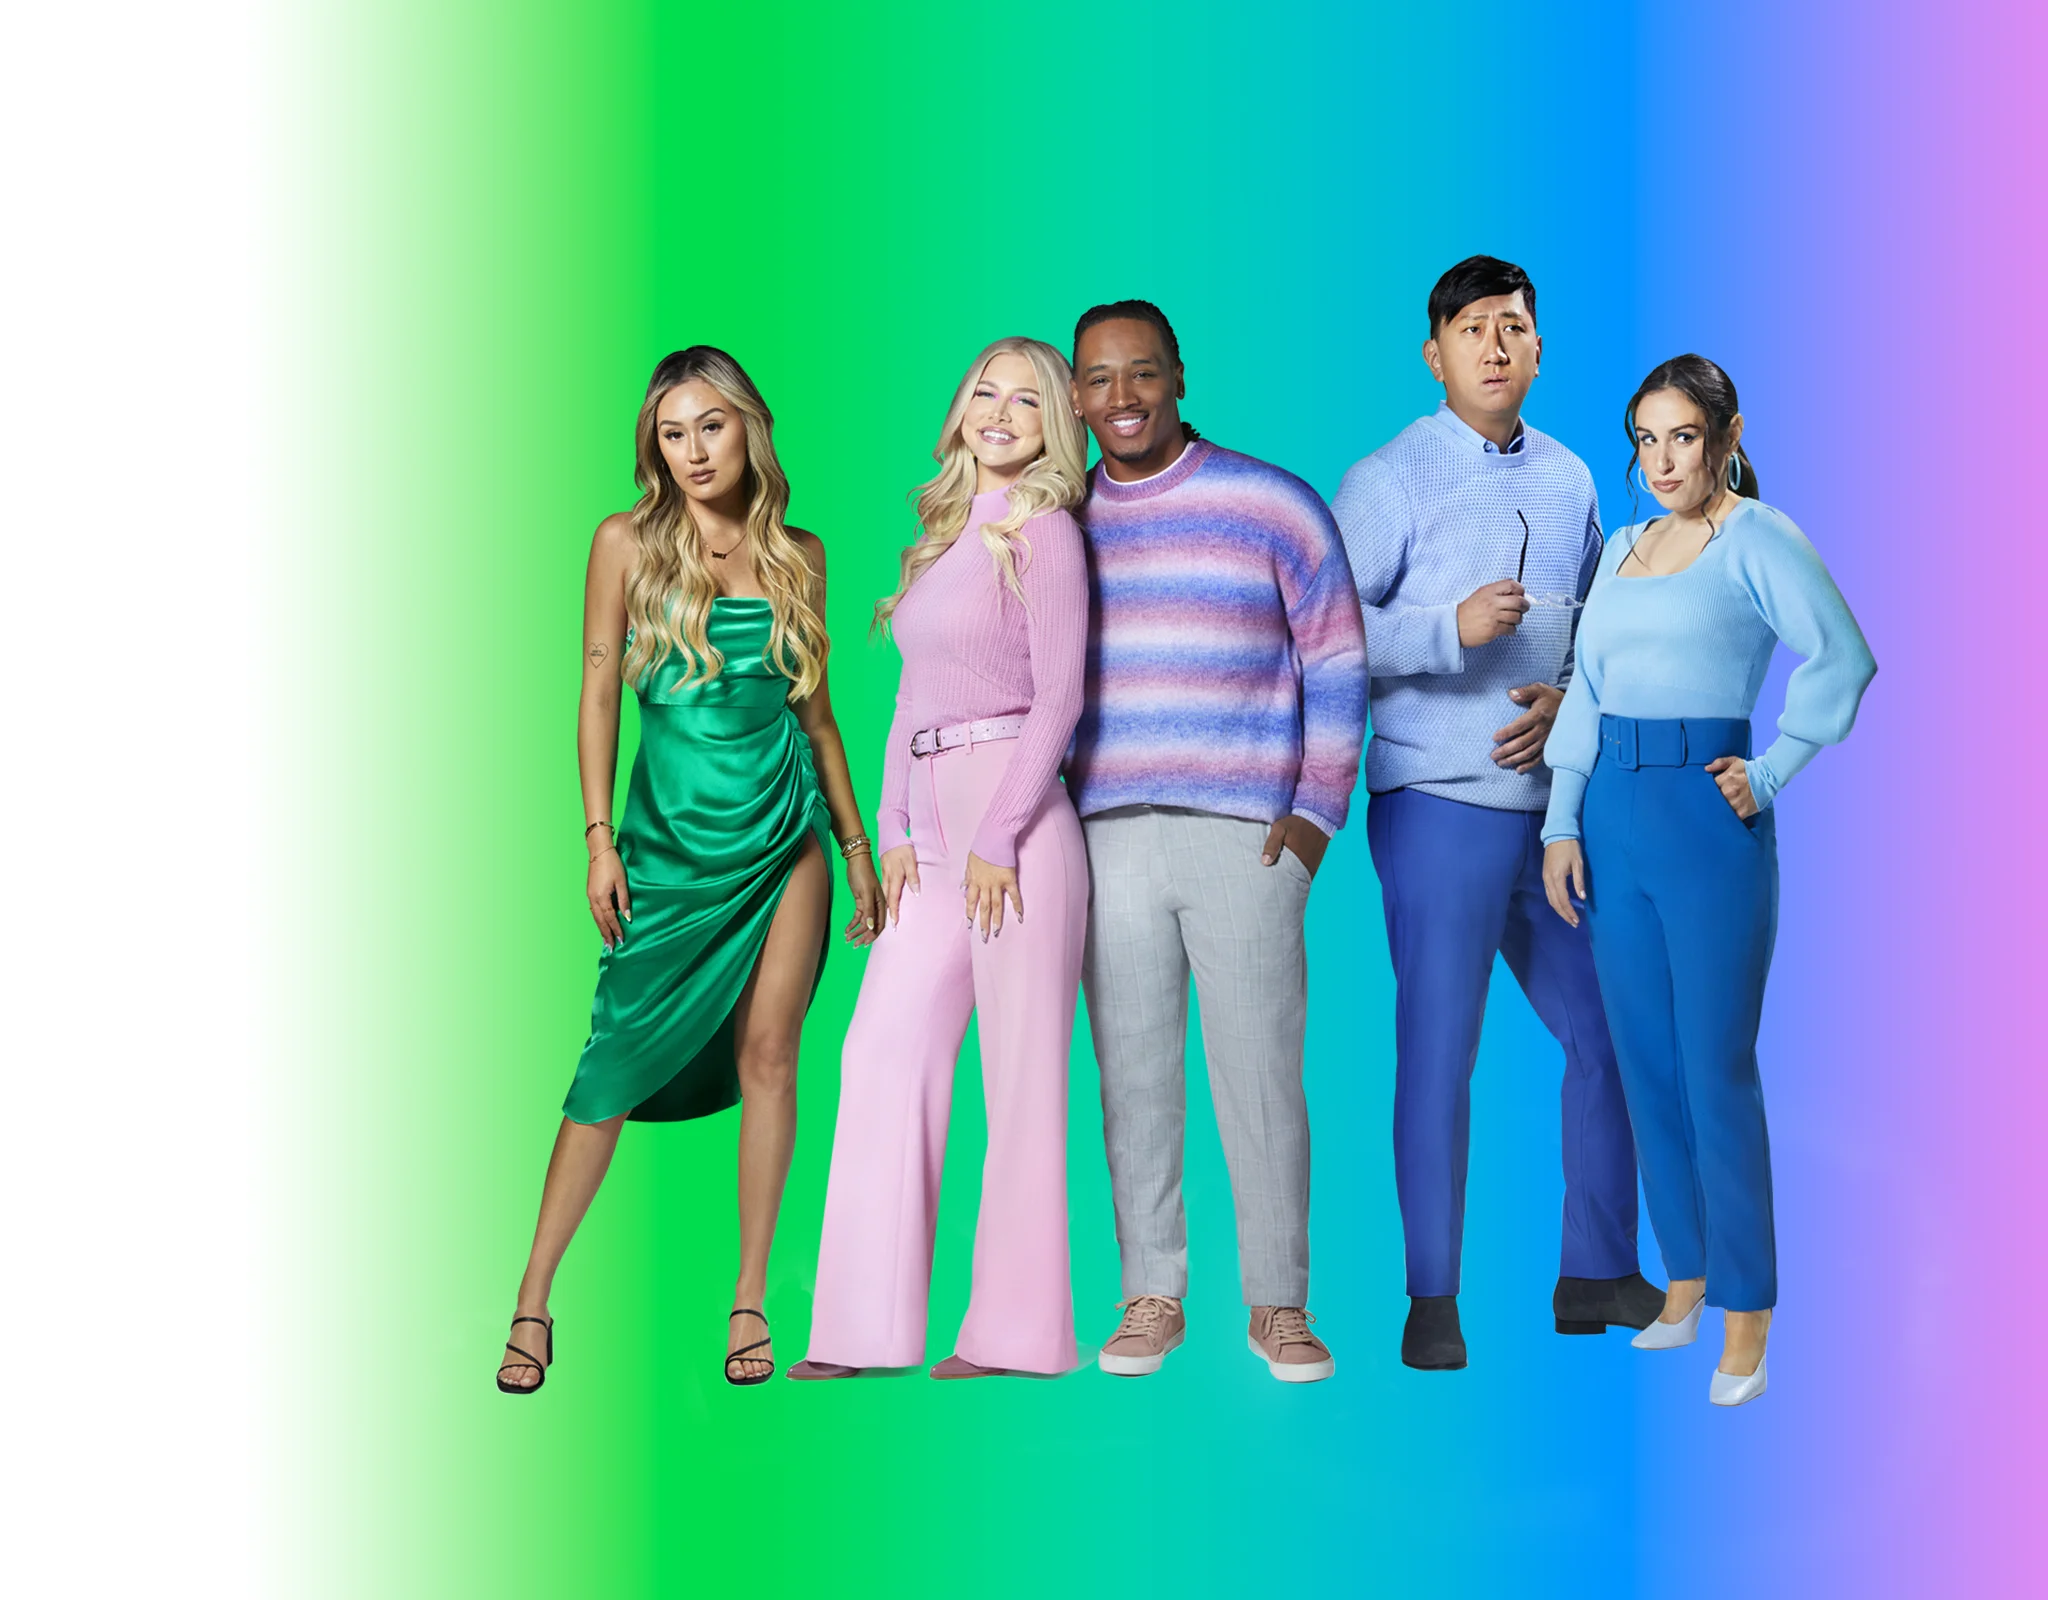 Five digital creators posing with a colorful gradient background.